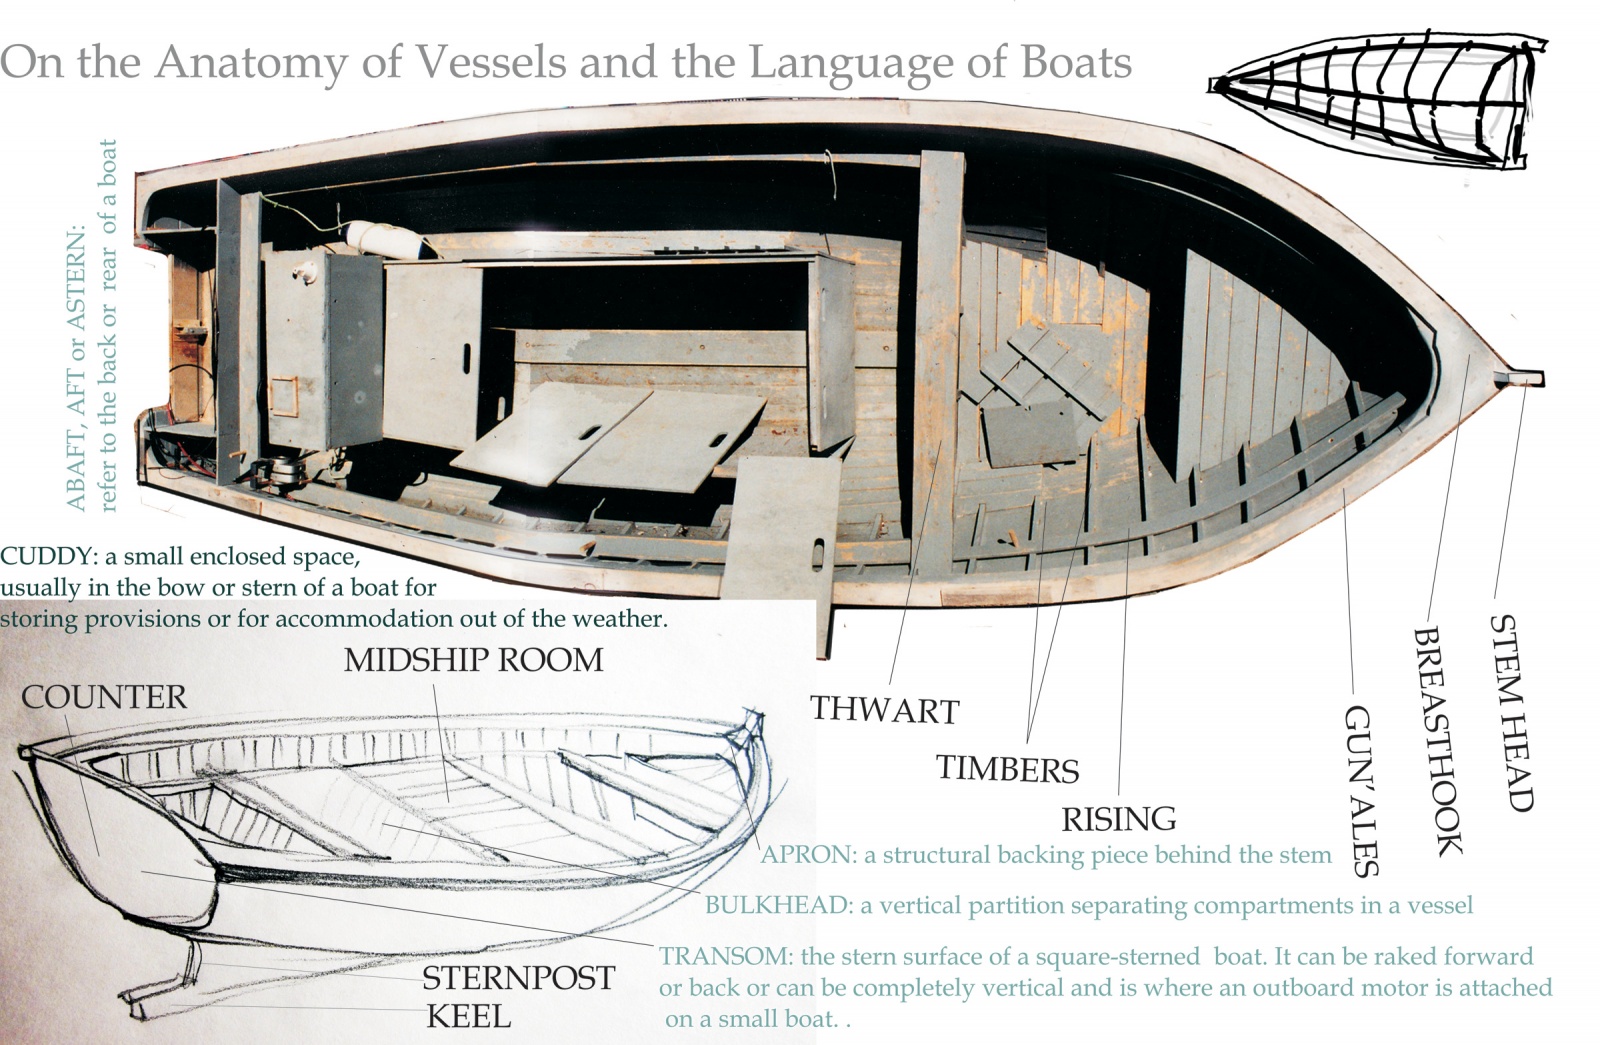 On the Anatomy of Vessels and the Language of Boats